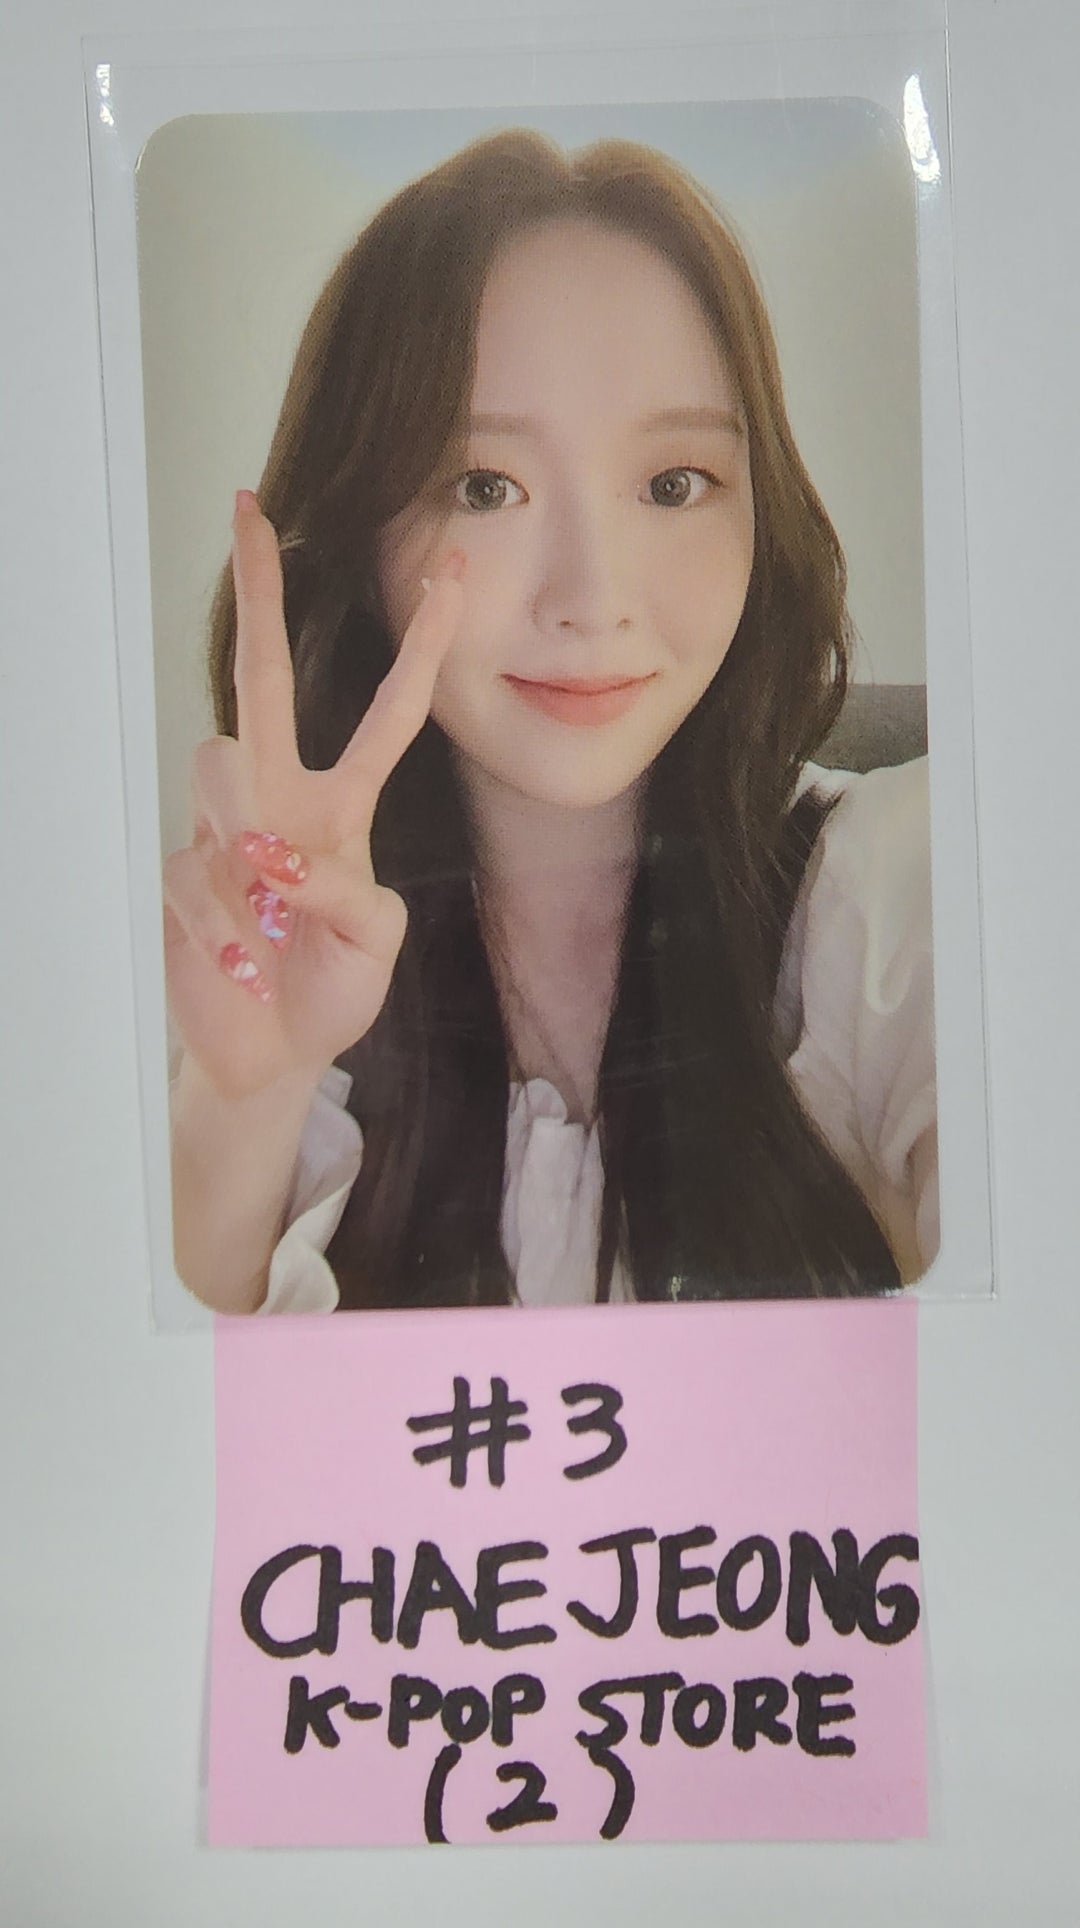 ALICE "DANCE ON" - K-Pop Store Fansign Event Photocard